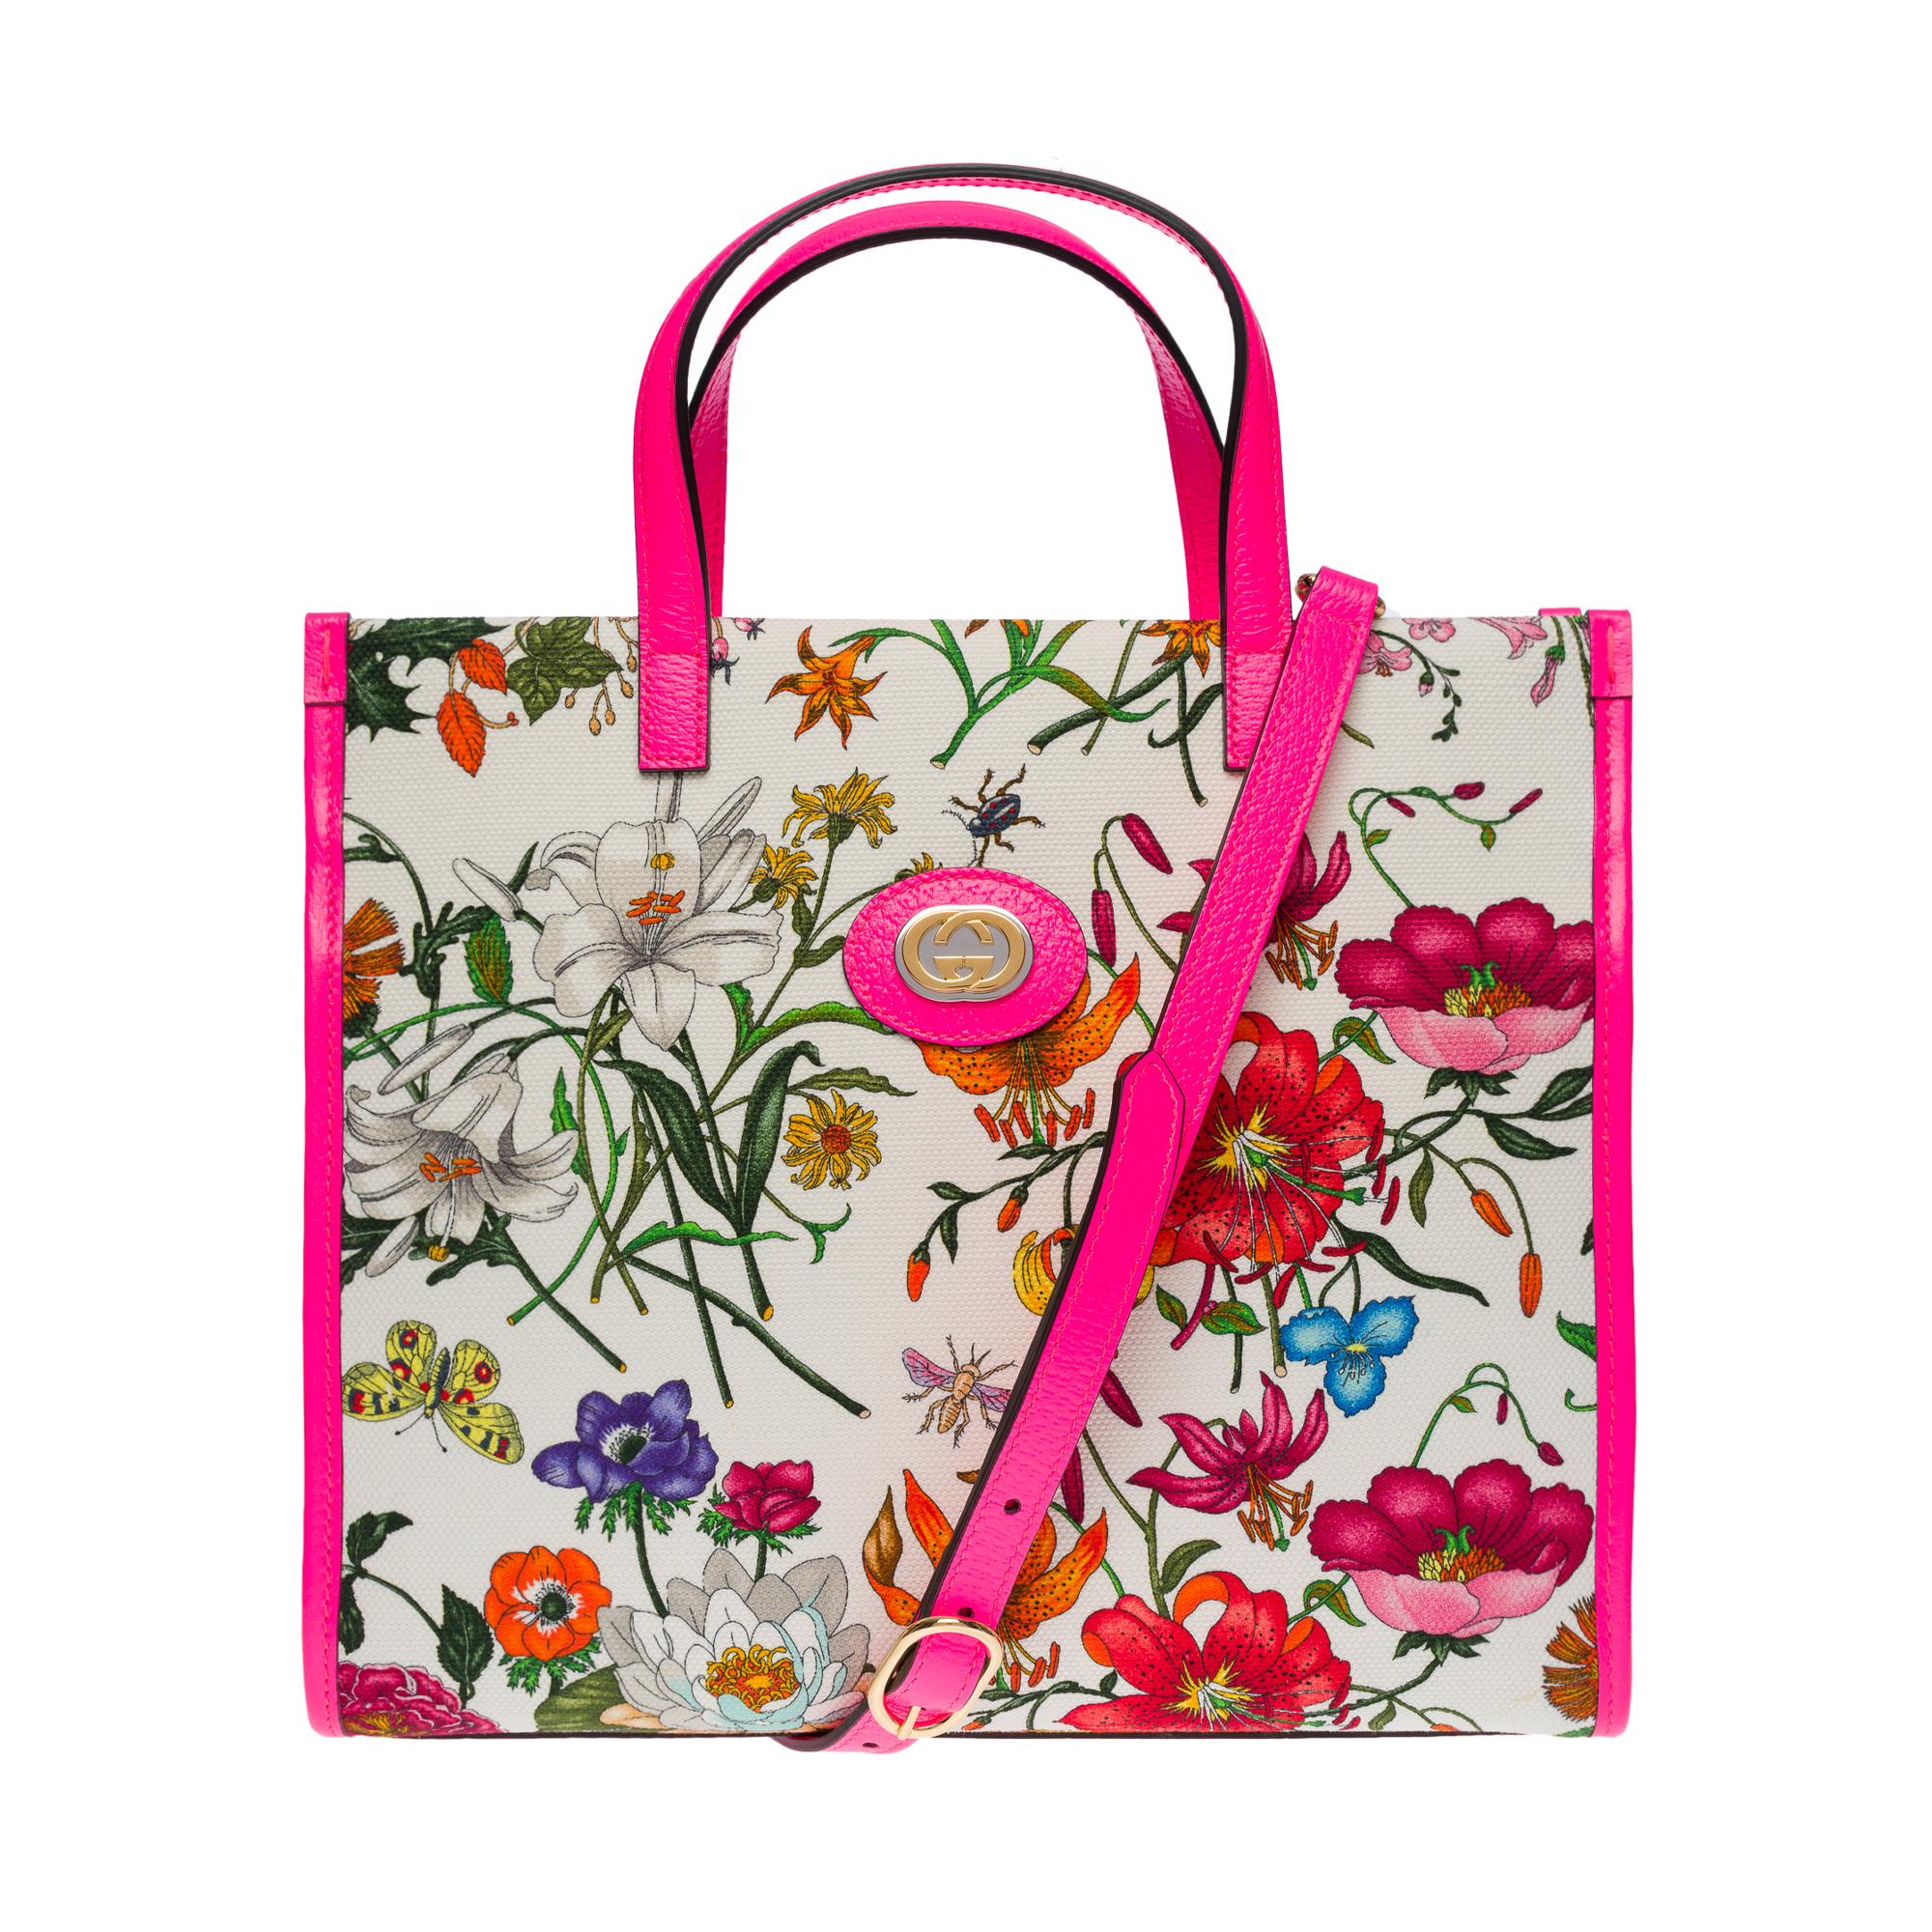 GUCCI Flora in Canvas and Leather with Nested G-Tote
Striking, playful and functional, this Flora tote comes from Gucci and offers style goals with every swing and spin. Made in Italy, it has been meticulously made from multicolored floral printed